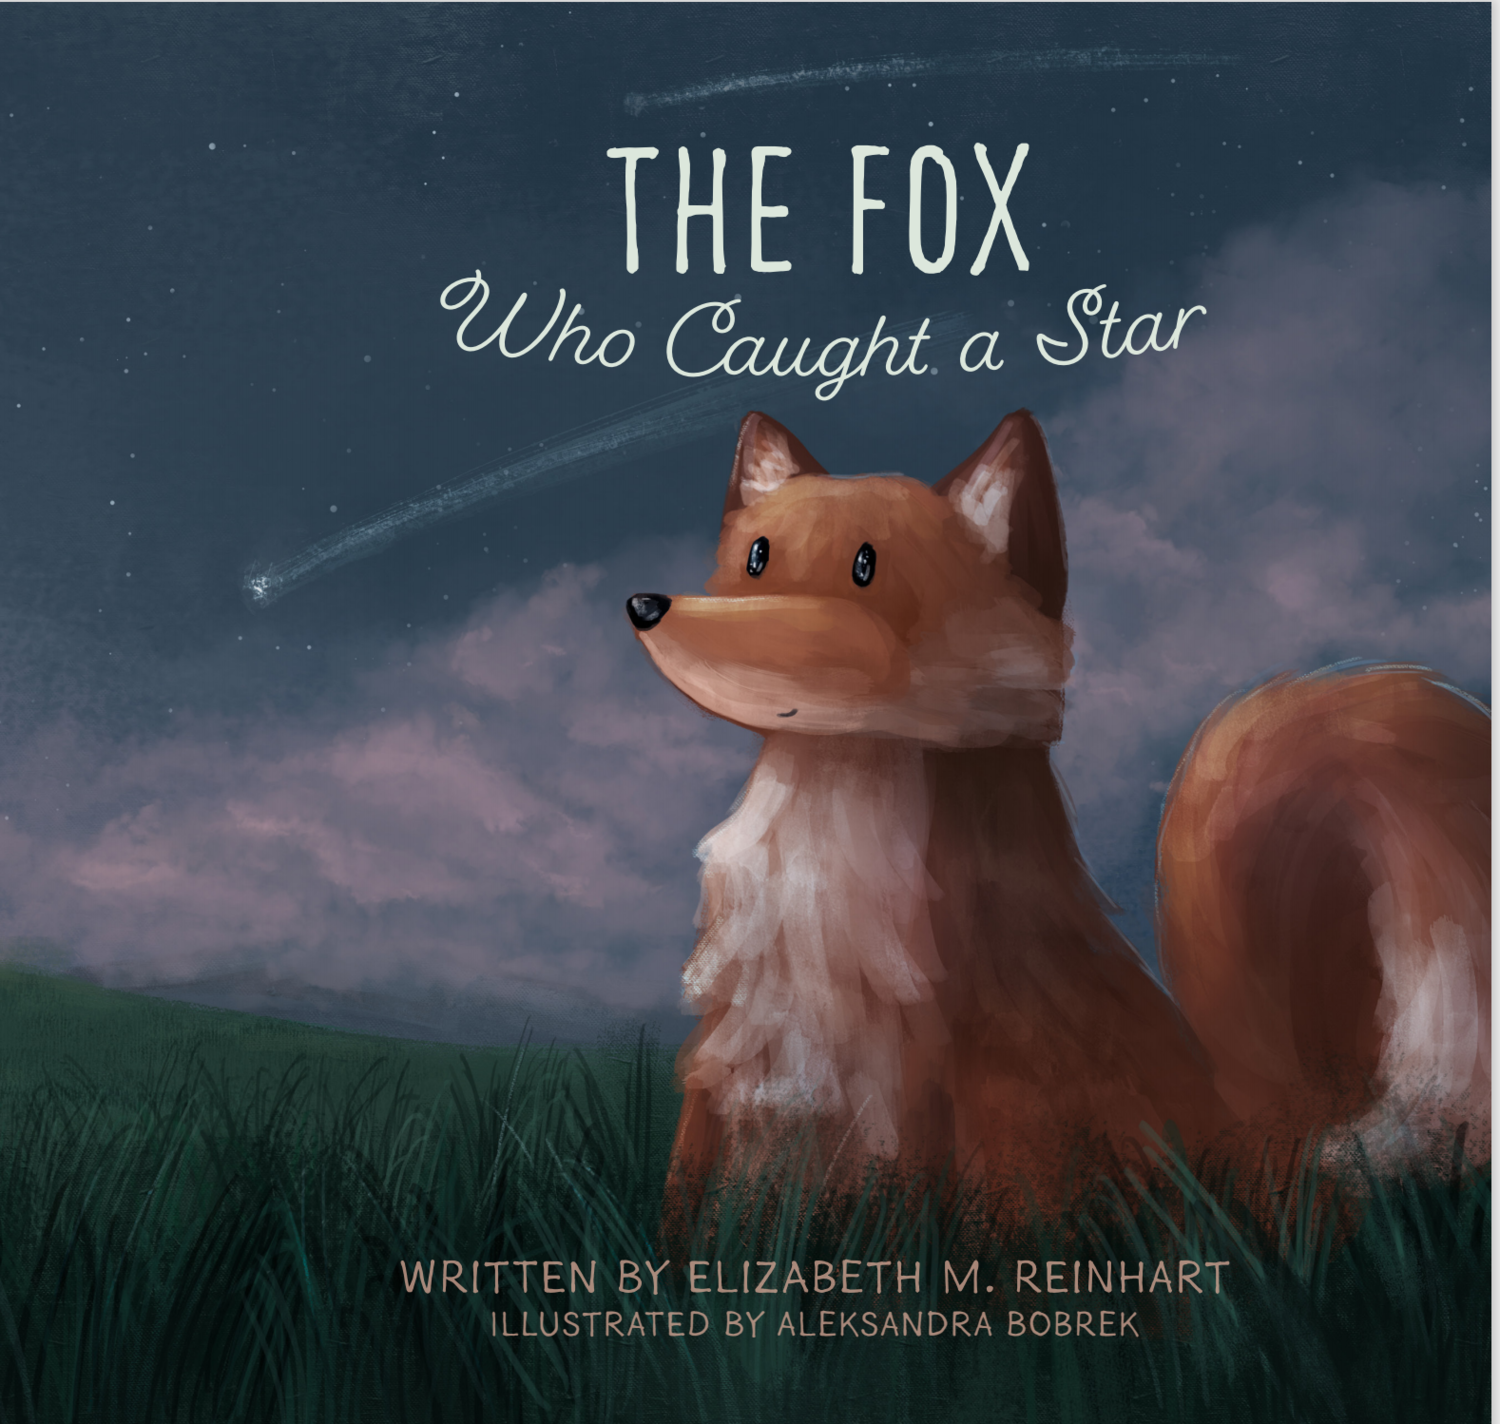 The Fox Who Caught a Star